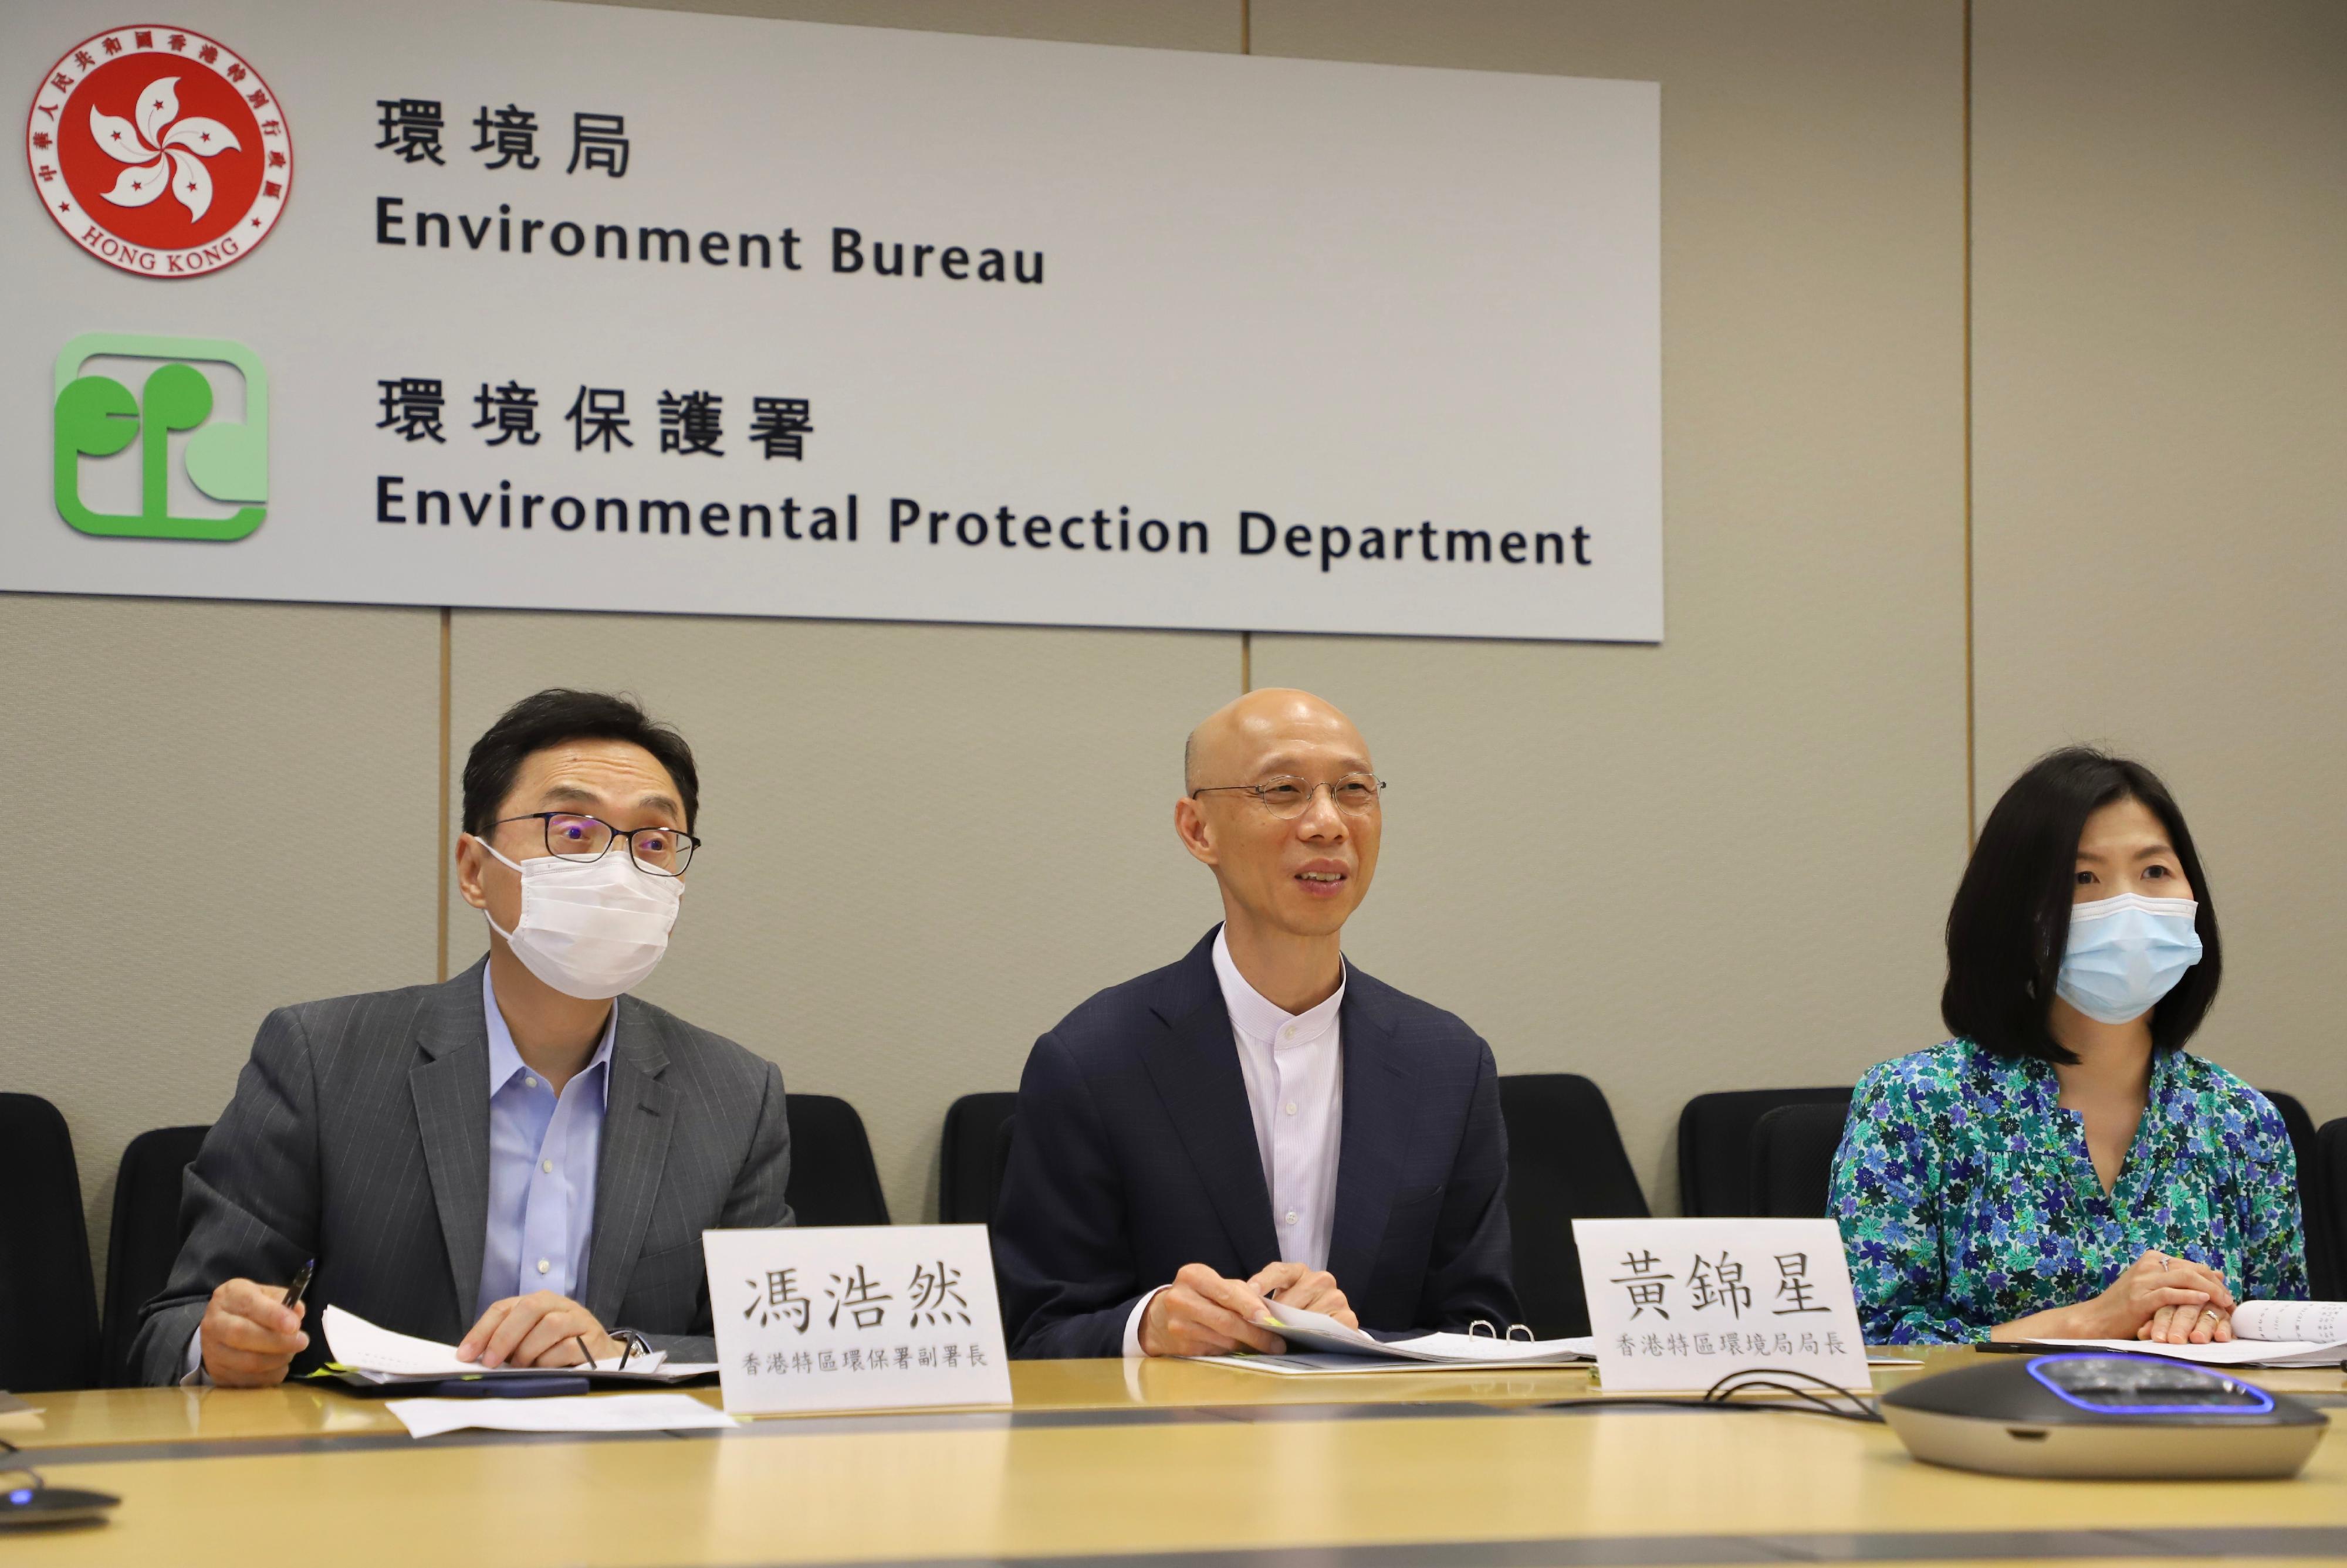 The eighth meeting of the Hong Kong-Guangdong Joint Working Group on Cleaner Production was held via video conferencing today (December 16) to discuss and review the work progress in 2021 and agree on the 2022 work plan. Photo shows the Secretary for the Environment, Mr Wong Kam-sing (centre), together with members of the Hong Kong Special Administrative Region Government delegation.